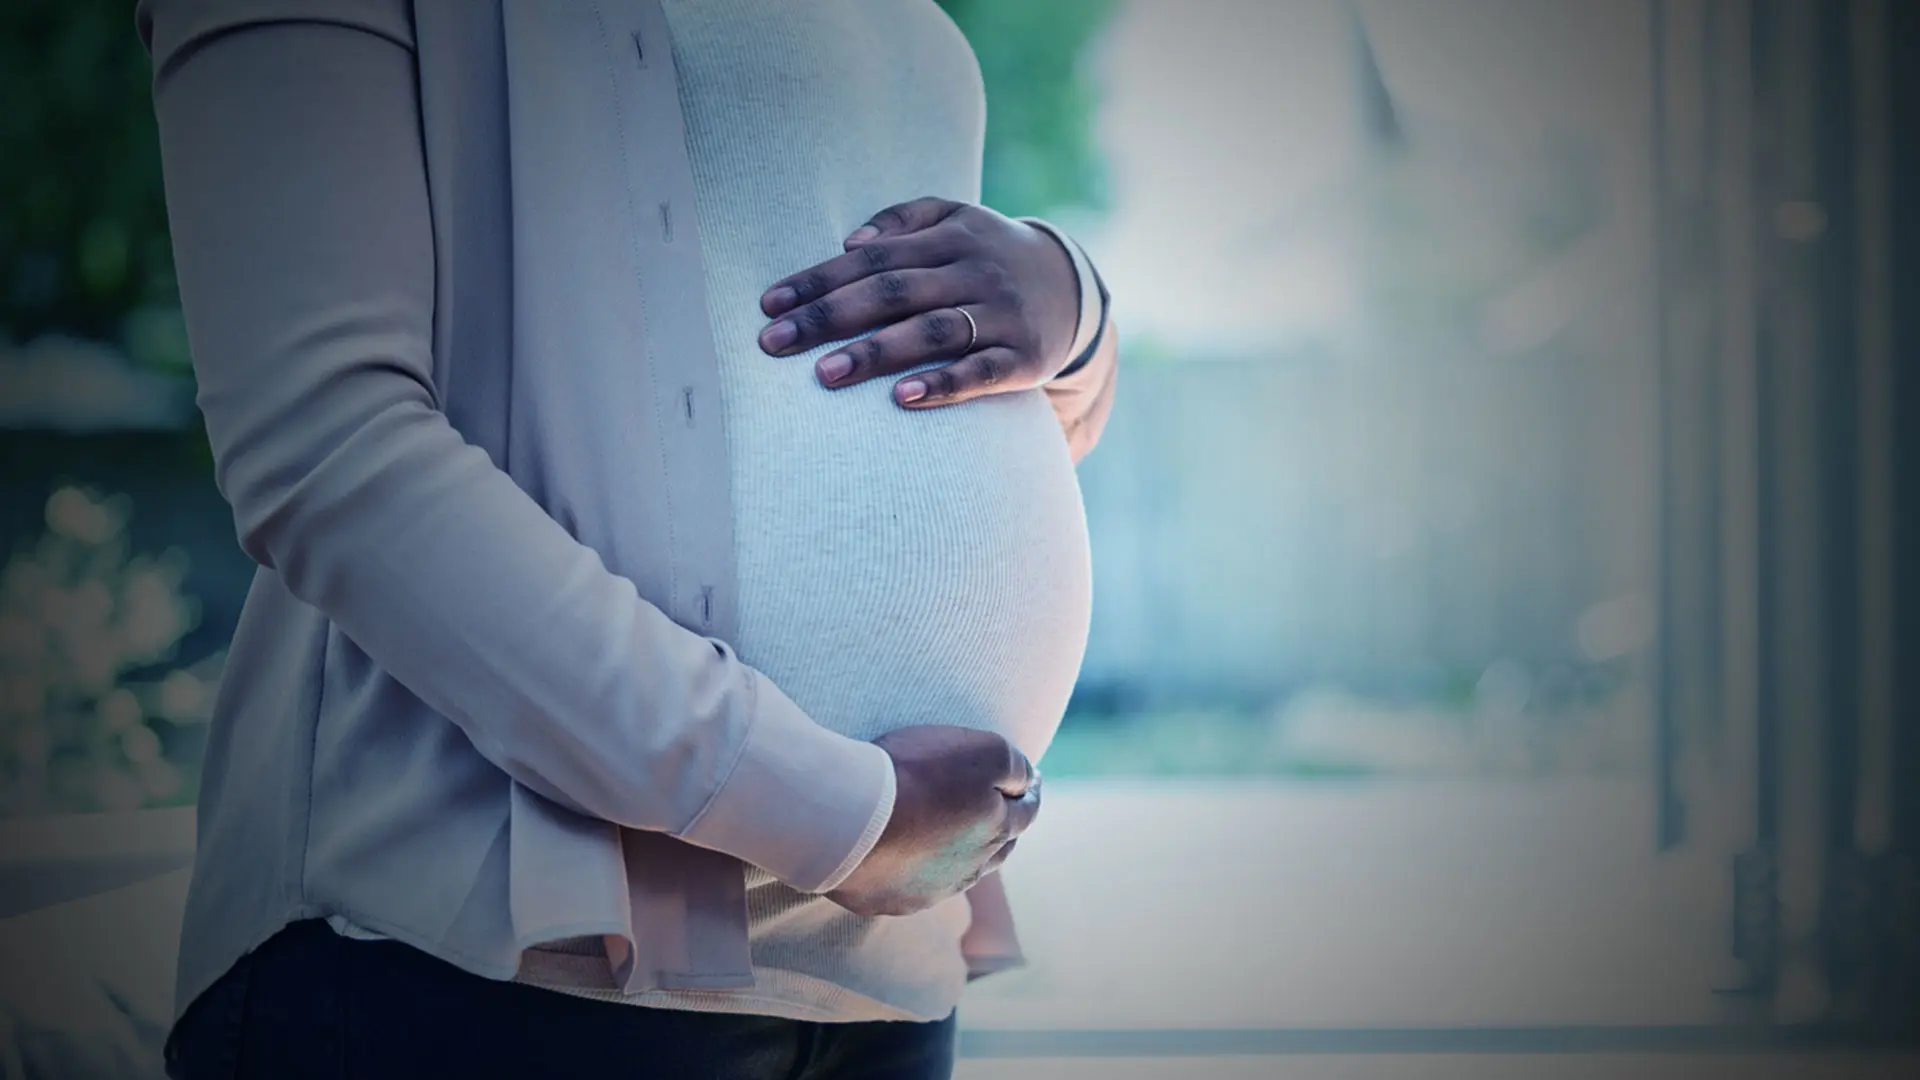 Neighborhoods Most Affected by Racism, Inequities, and COVID-19 Stressors at a Greater Risk for Preterm Births, Study Finds